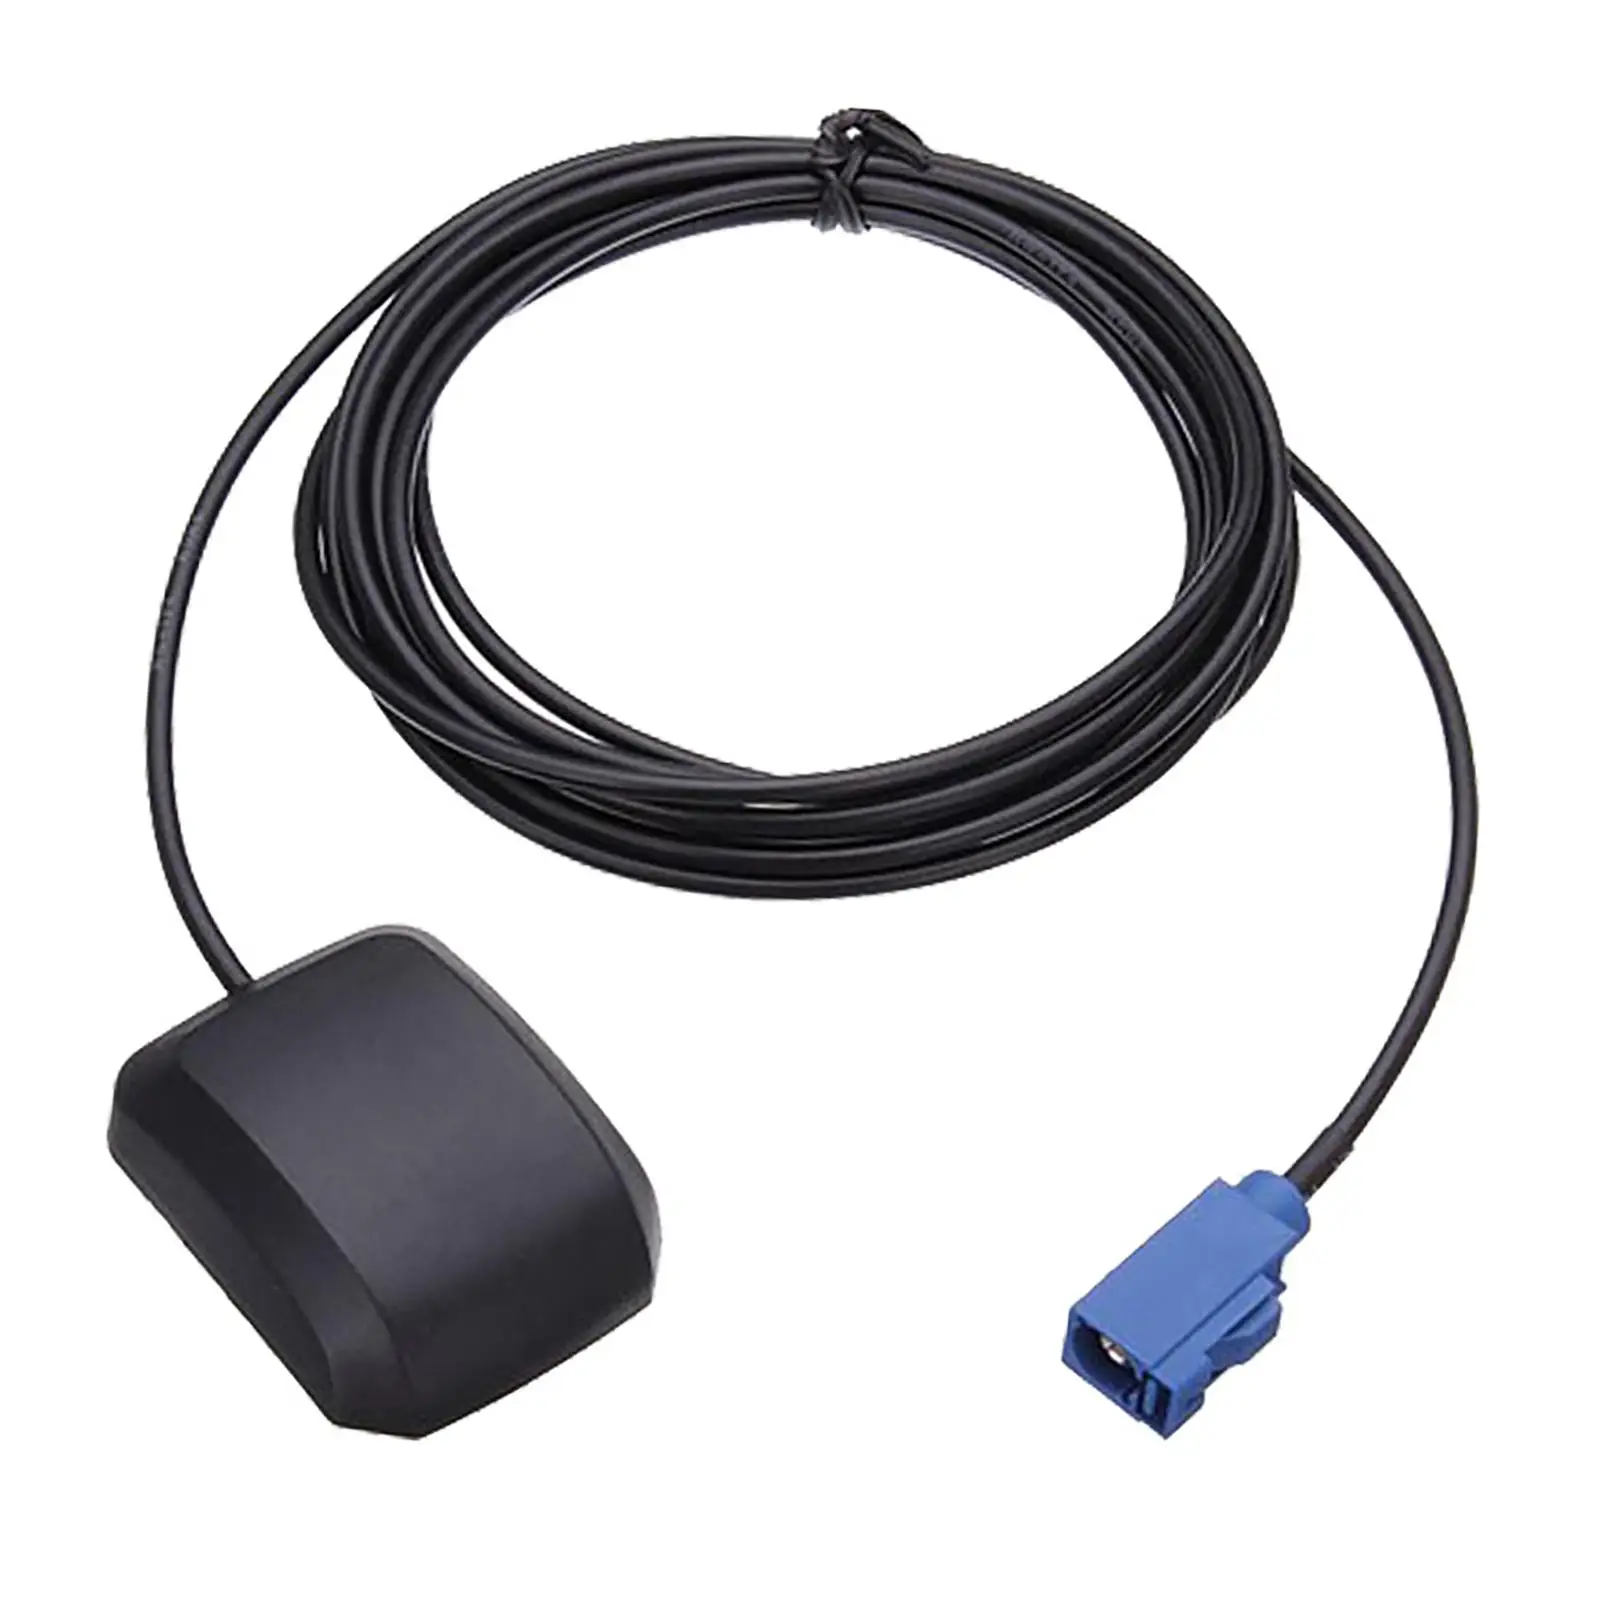 Vehicle Active Navigation with C Male Connector for Car Truck SUV Stereo Boat Marine Accessory